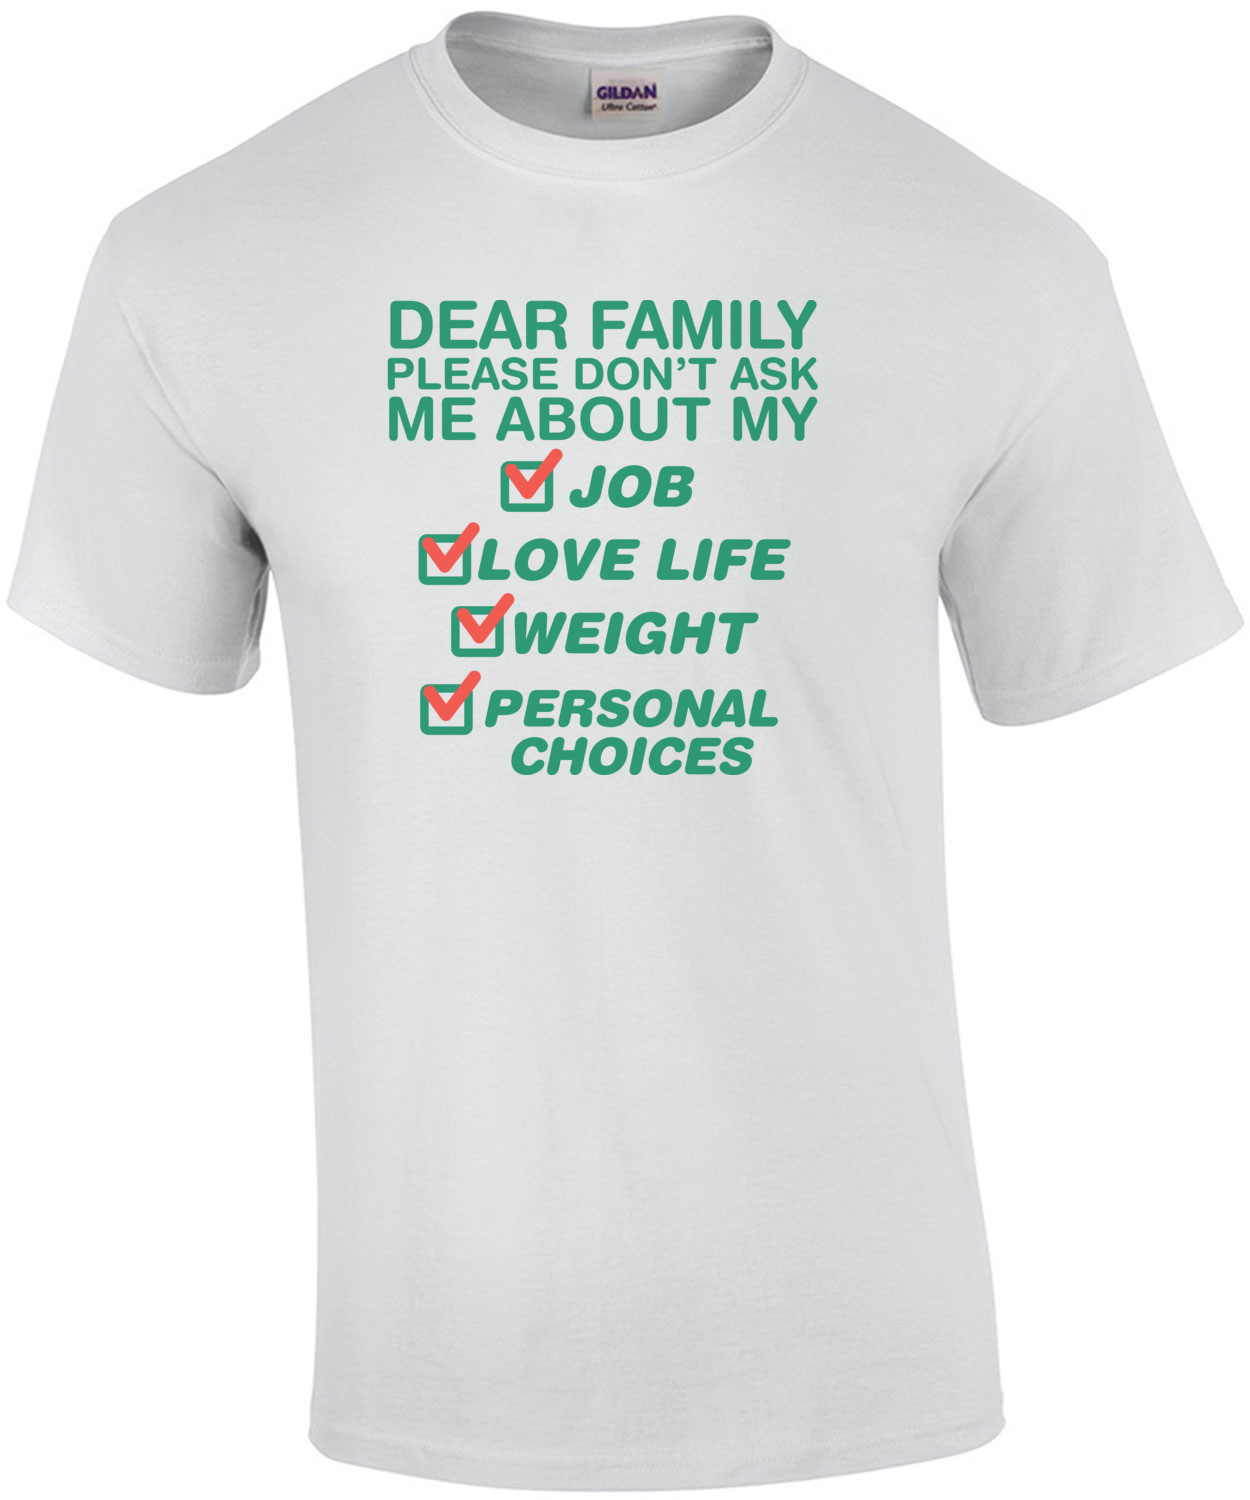 Dear family please dont ask me about my job, love life, weight, personal choices t-shirt